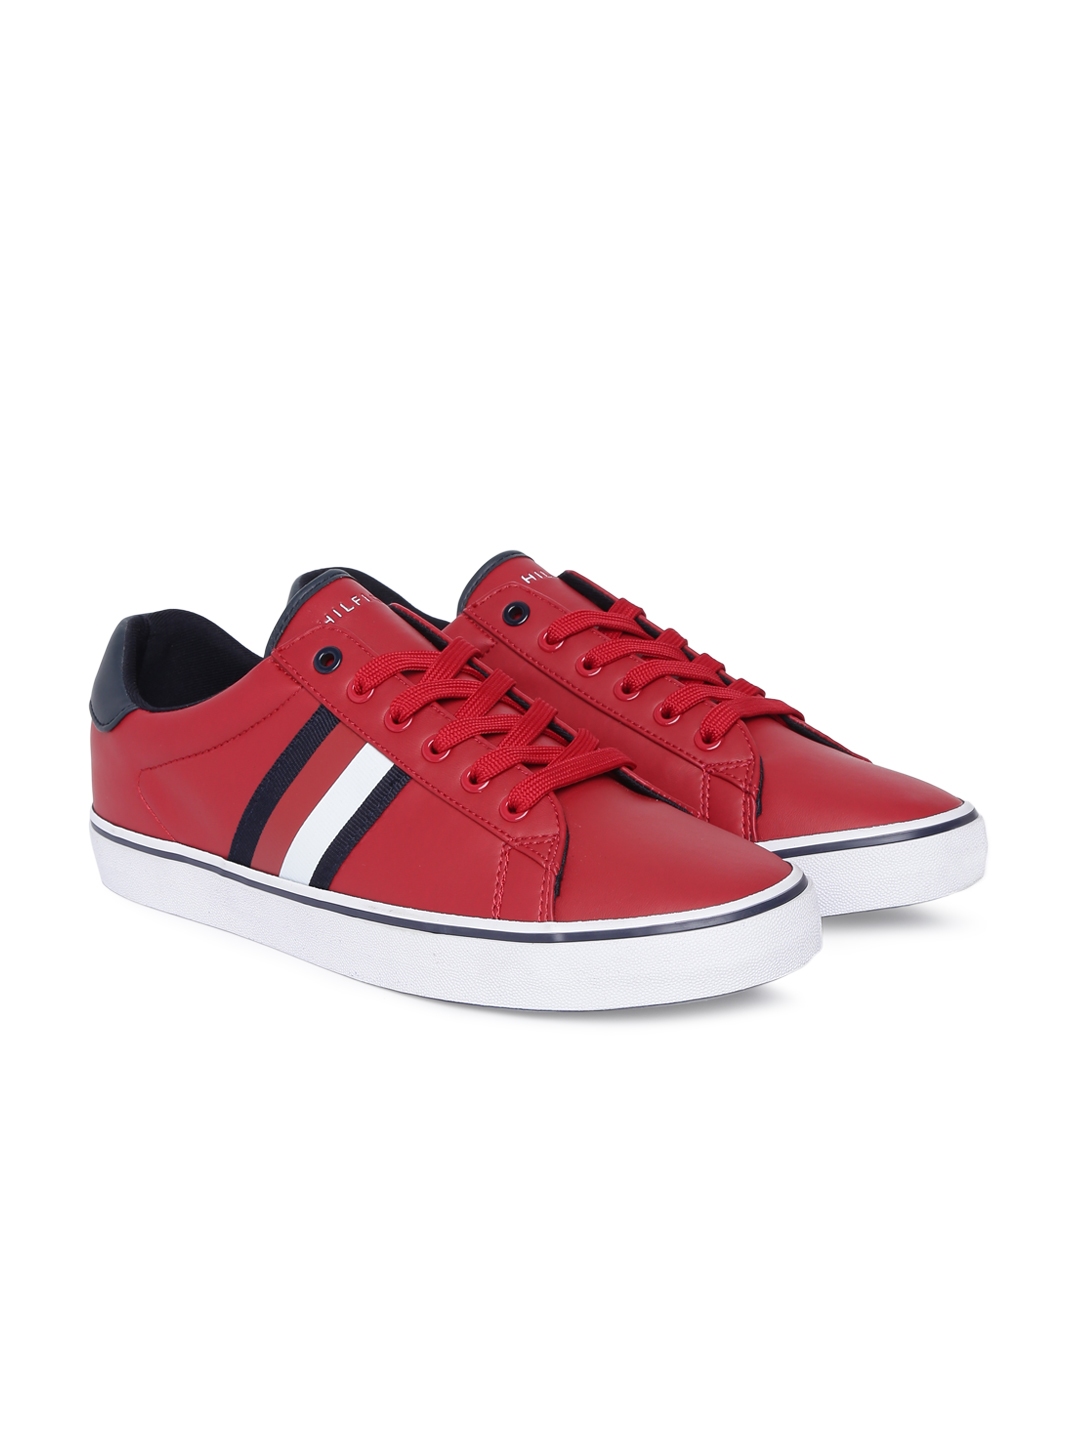 Buy Tommy Hilfiger Men Red Sneakers - Casual Shoes for Men 8623127 | Myntra